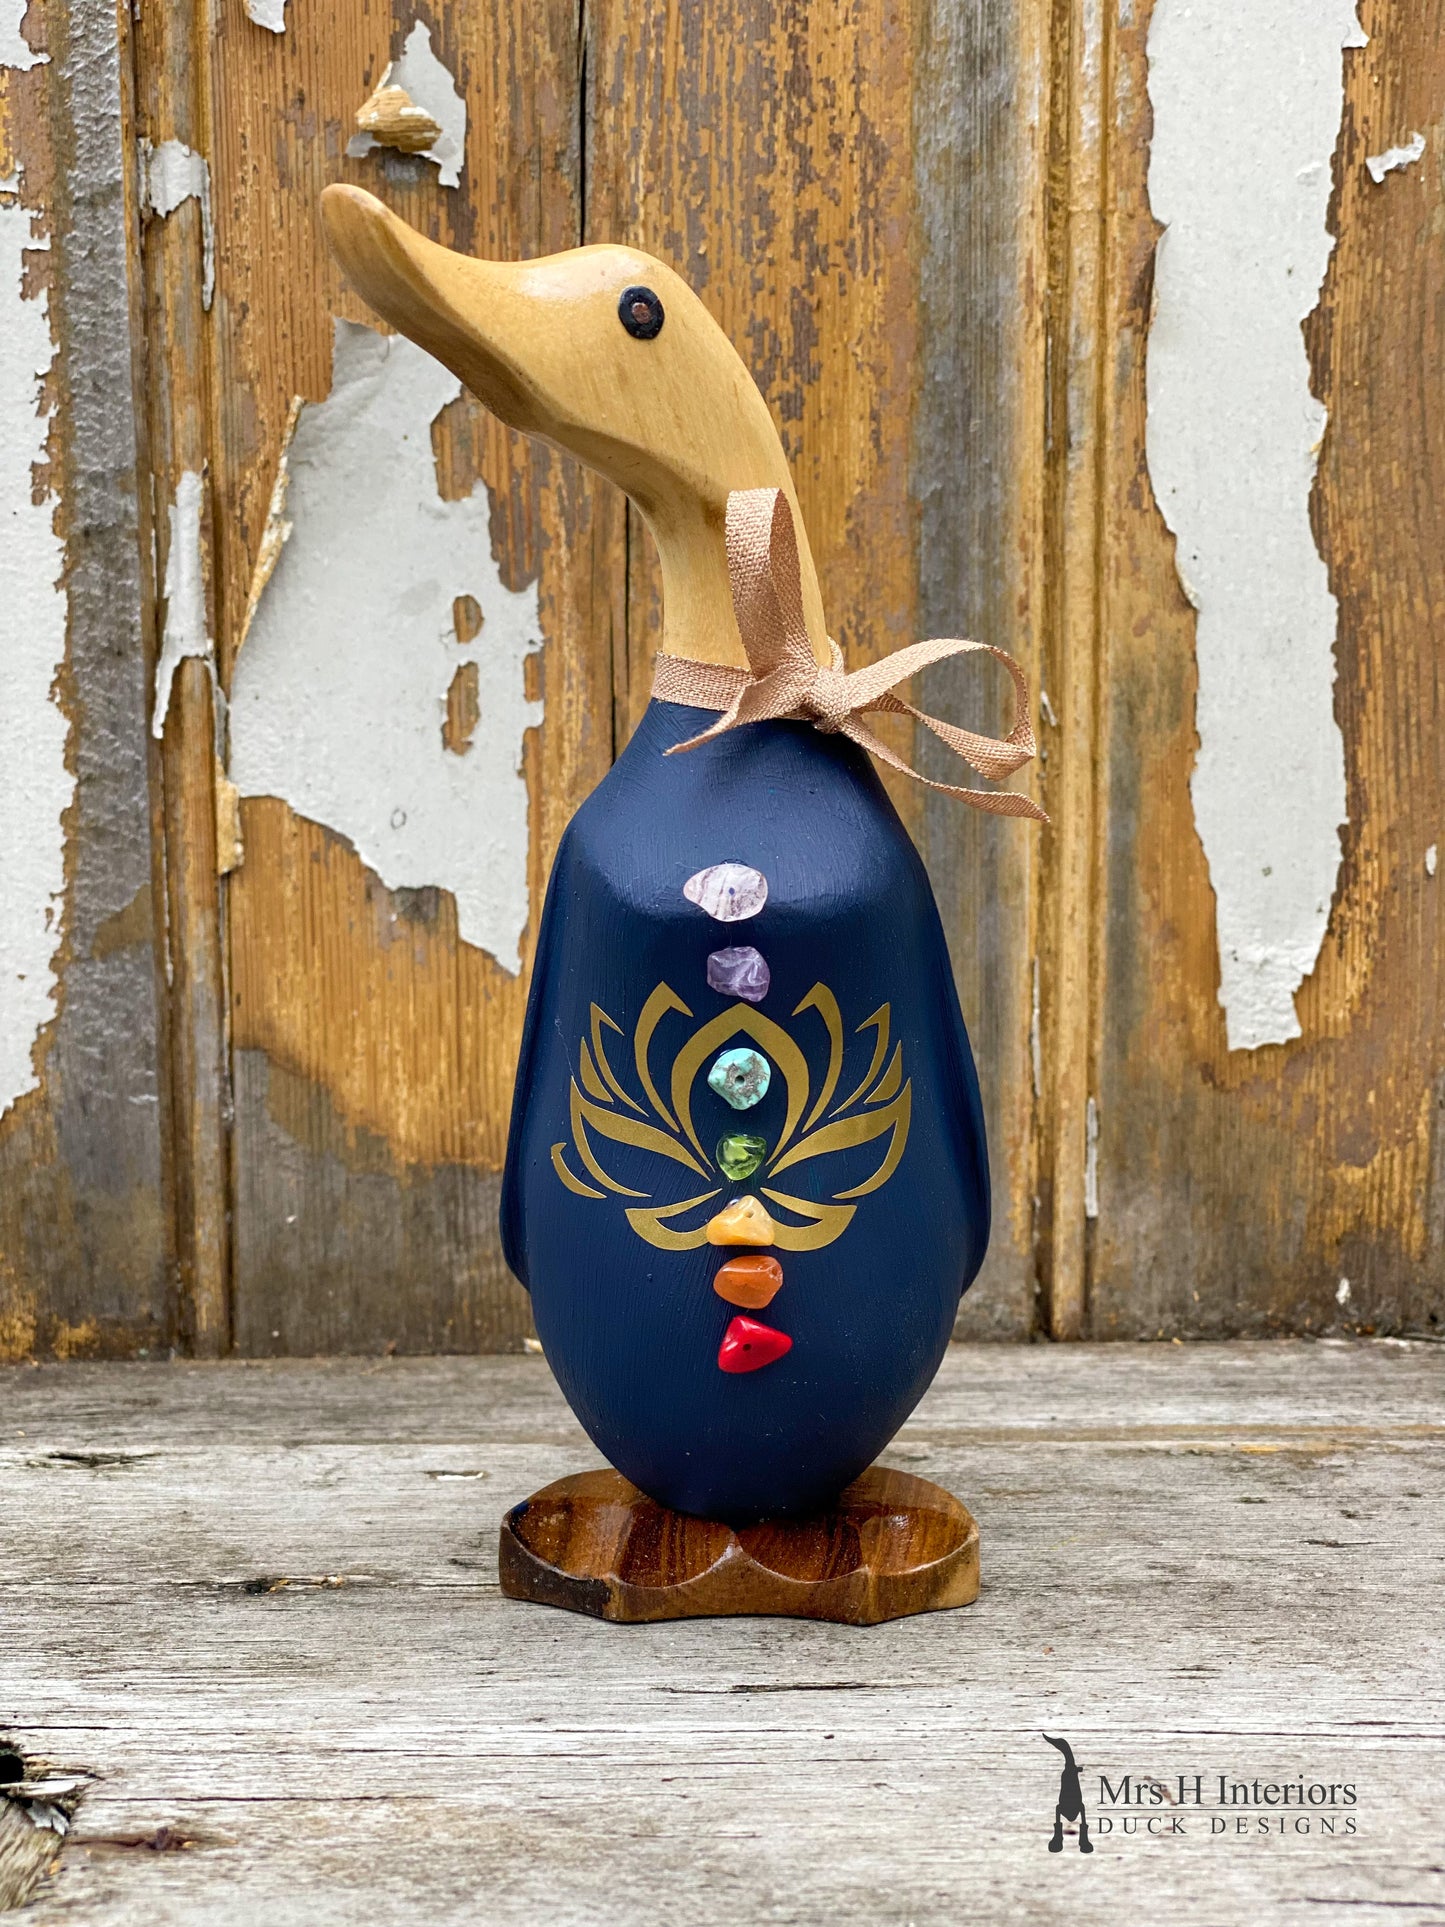 Chakra The Crystal Duck - Decorated Wooden Duck in Boots by Mrs H the Duck Lady